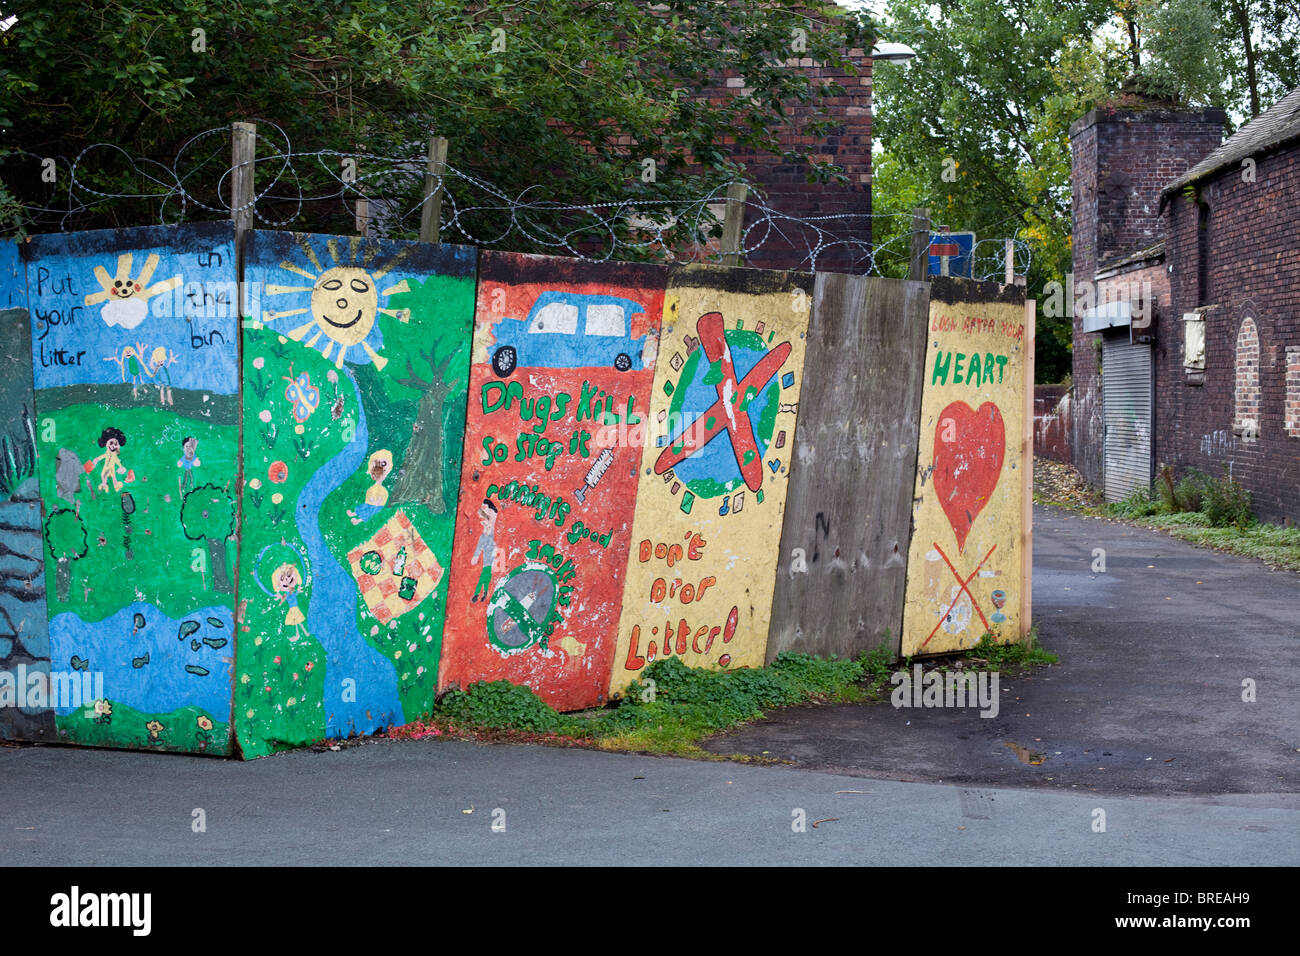 Colourful positive slogans and messages painted by young people on wooden panels in a run down area of Stoke-On-Trent, UK Stock Photo